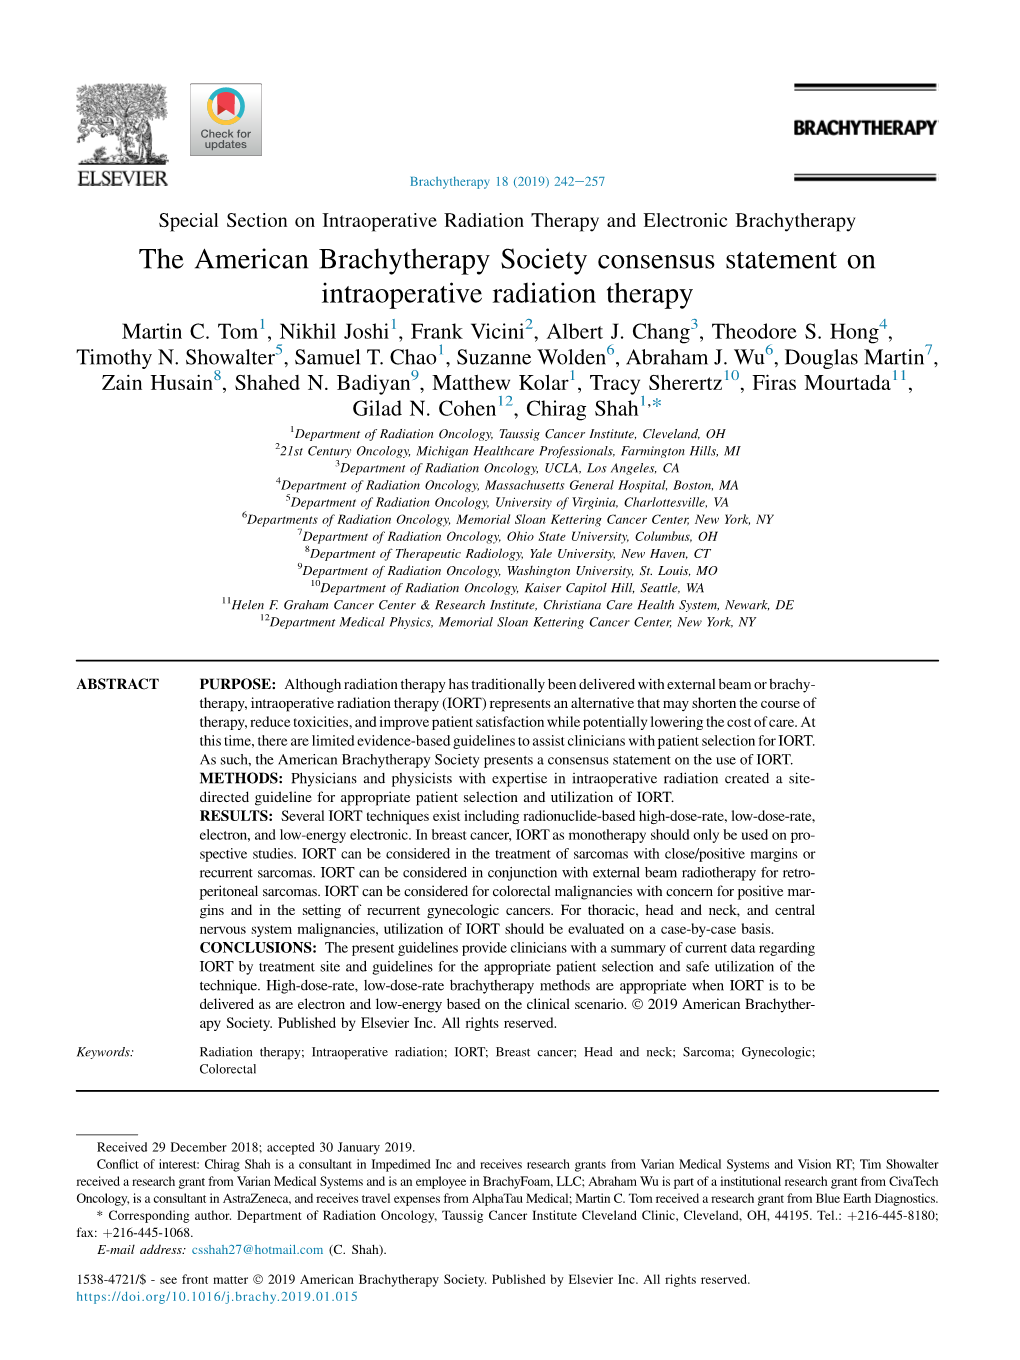 The American Brachytherapy Society Consensus Statement on Intraoperative Radiation Therapy Martin C